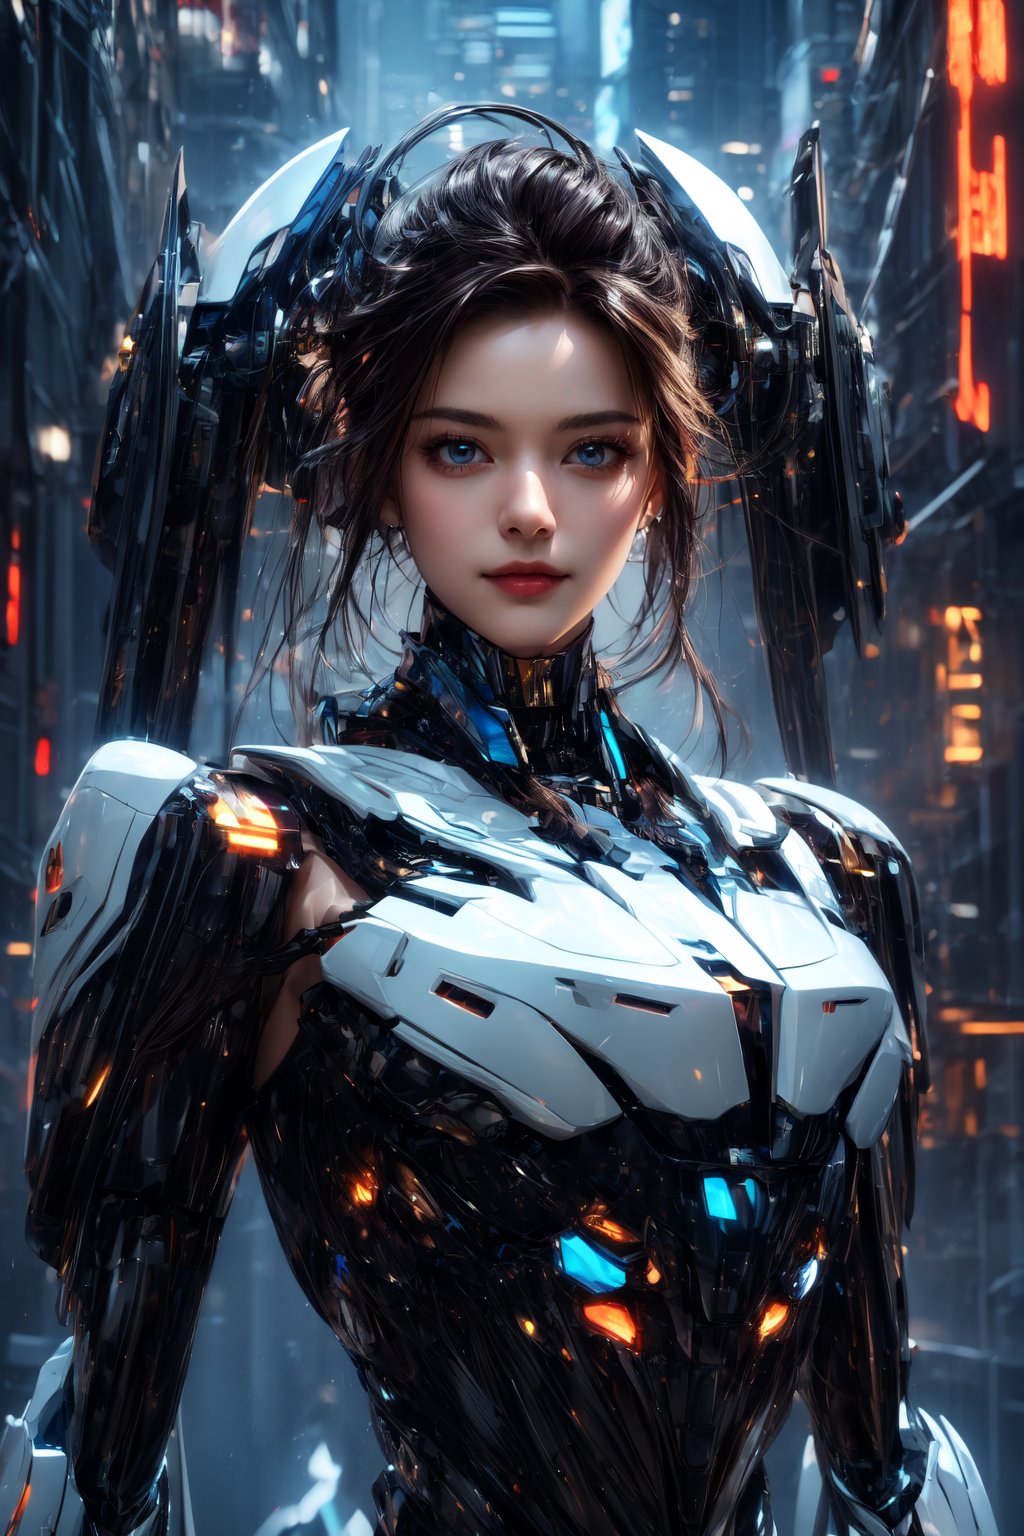 Masterpiece, High quality, 64K, Unity 64K Wallpaper, HDR, Best Quality, RAW, Super Fine Photography, Super High Resolution, Super Detailed, 
Beautiful and Aesthetic, Stunningly beautiful, Perfect proportions, 
1girl, Solo, White skin, Detailed skin, Realistic skin details, 
Futuristic Mecha, Arms Mecha, Dynamic pose, Battle stance, Swaying hair, by FuturEvoLab, 
Dark City Night, Cyberpunk city, Cyberpunk architecture, Future architecture, Fine architecture, Accurate architectural structure, Detailed complex busy background, Gorgeous, 
Sharp focus, Perfect facial features, Pure and pretty, Perfect eyes, Lively eyes, Elegant face, Exquisite face, Delicate face, Matrix,